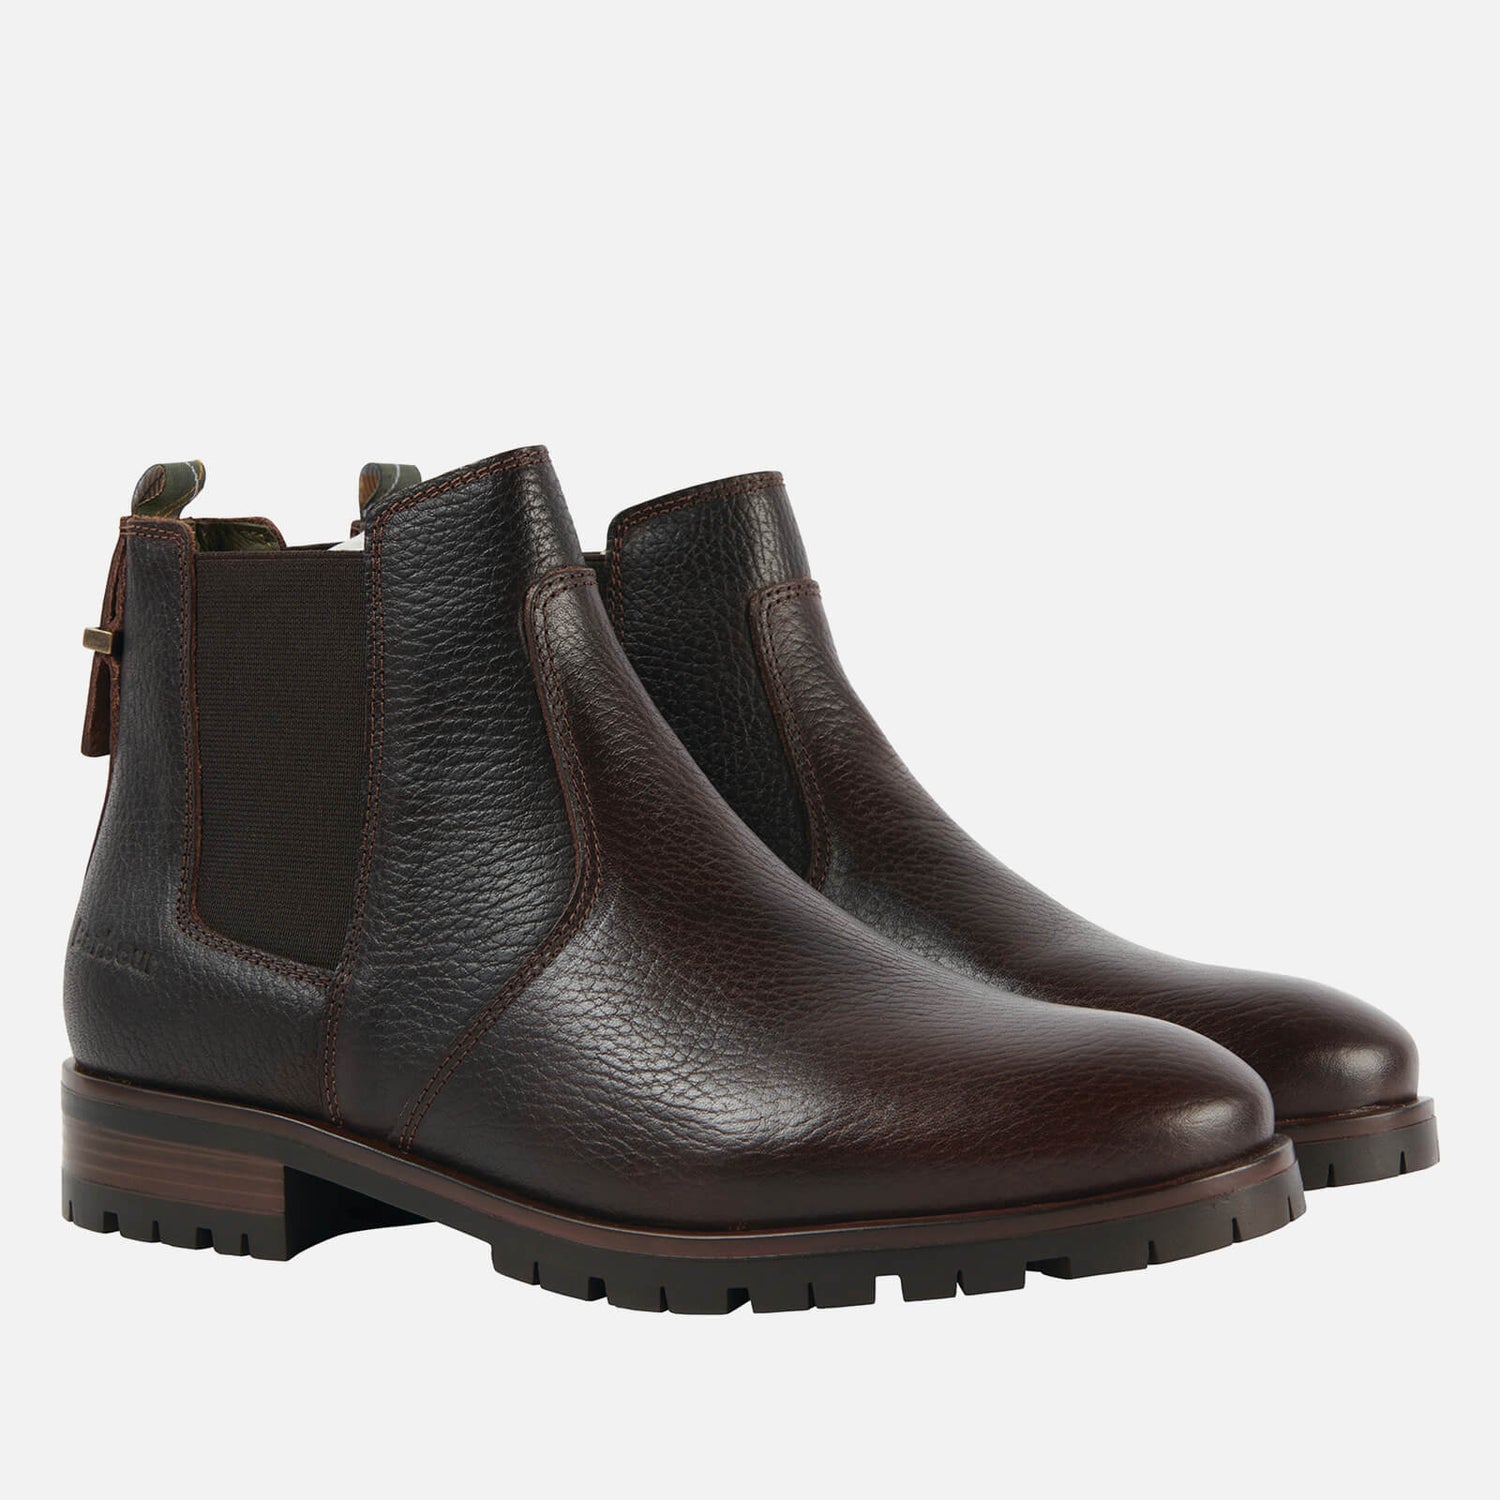 Barbour Nina Leather Chelsea Boots - UK 3